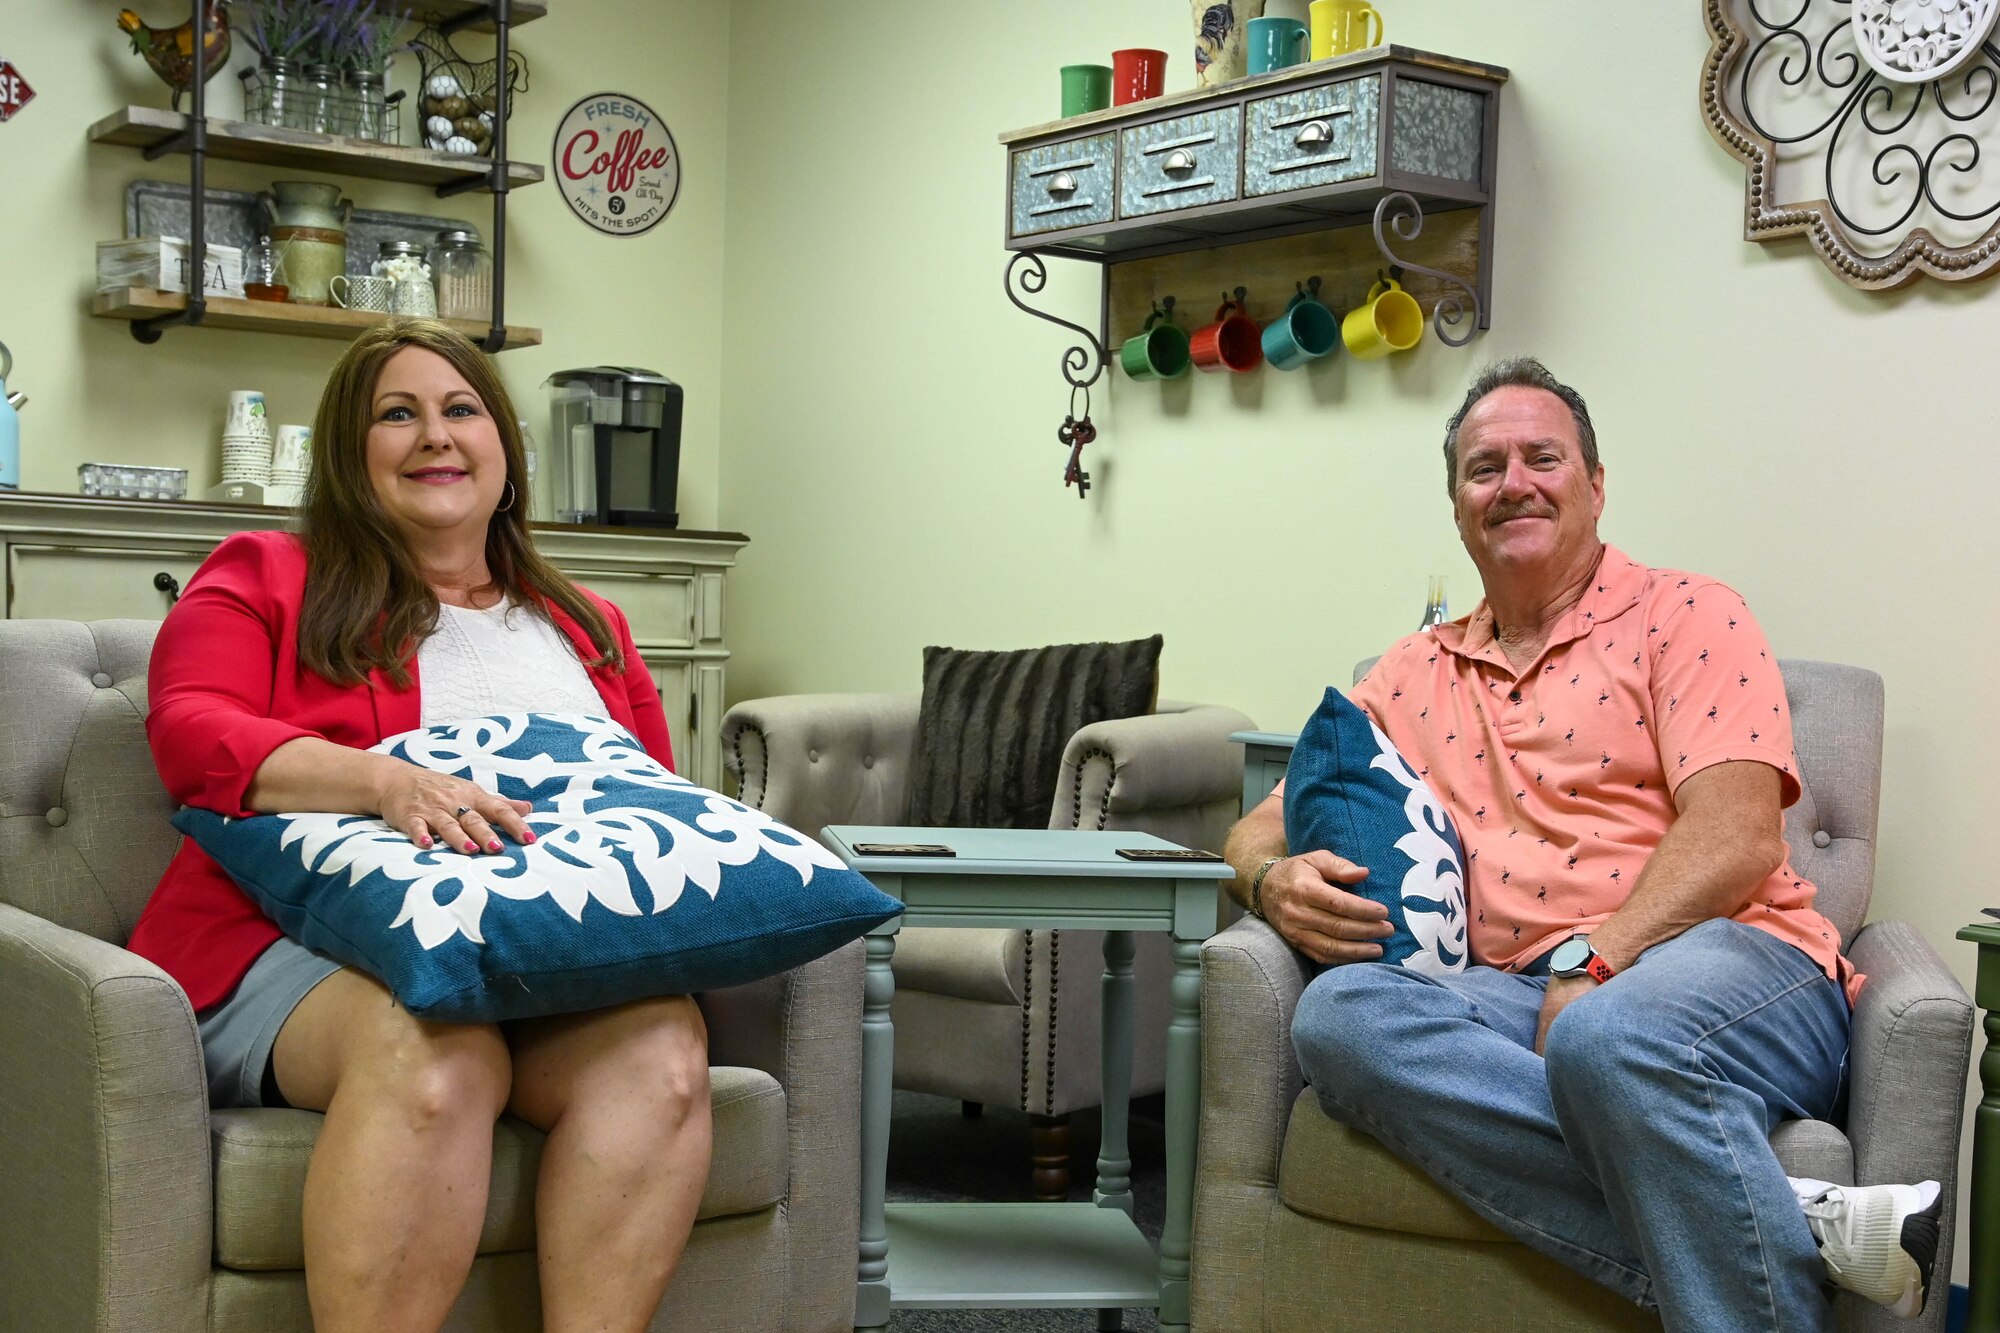 From left, Susan Bradford, 97th Air Mobility Wing (AMW) violence prevention integrator (VPI), and Chris Hargis, 97th AMW community support coordinator (CSC), sit in the VPI coffee lounge at the Airmen Readiness Center at Altus Air Force Base (AAFB), Oklahoma, June 9, 2022. The VPI and CSC work hand-in-hand to provide a better quality of life for Airmen and their families at AAFB. (U.S. Air Force photo by Senior Airman Kayla Christenson)